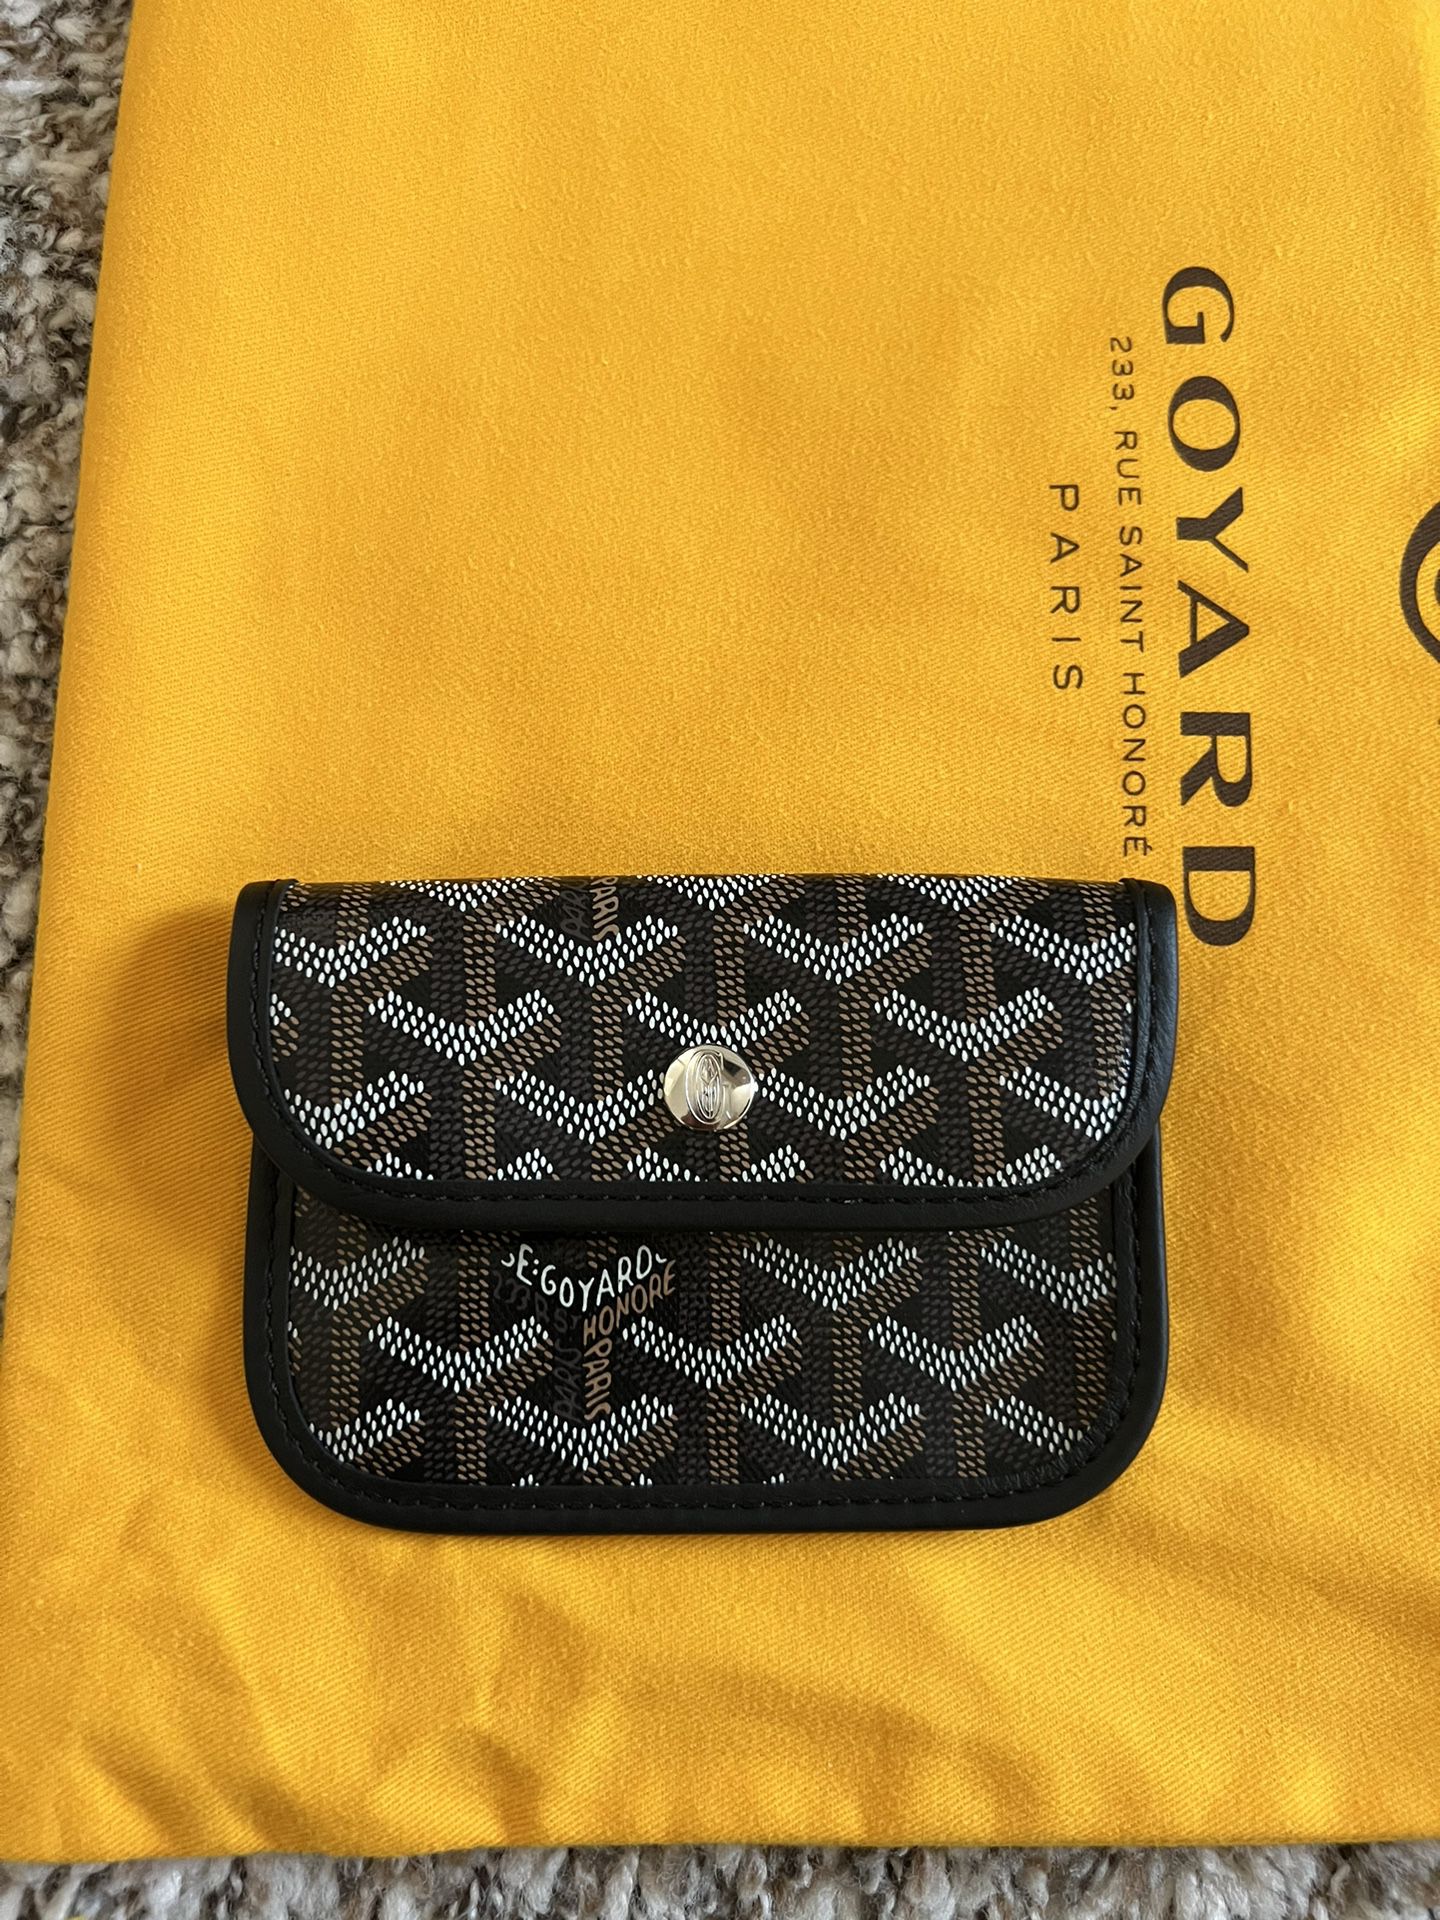 NEW AUTHENTIC GOYARD SMALL POUCH 